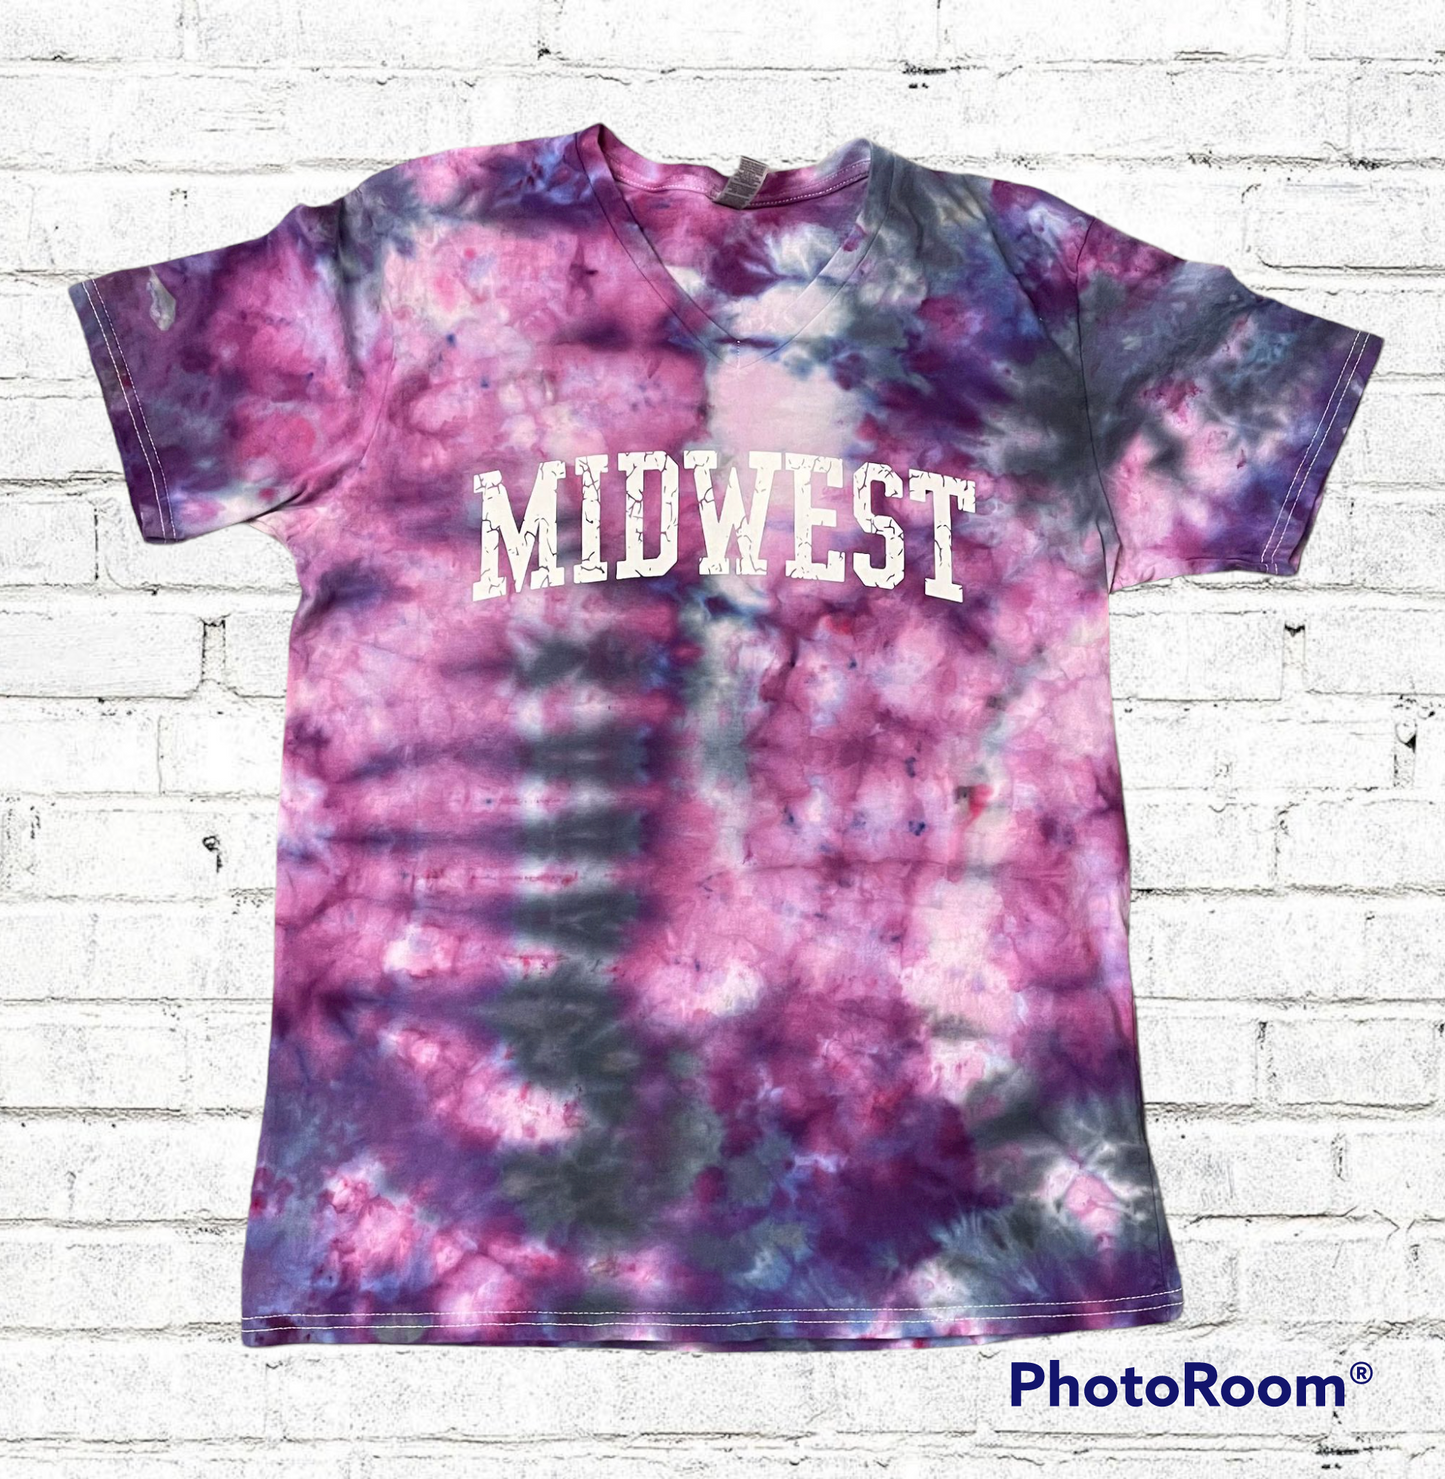 Midwest Tee - Adult Size Large